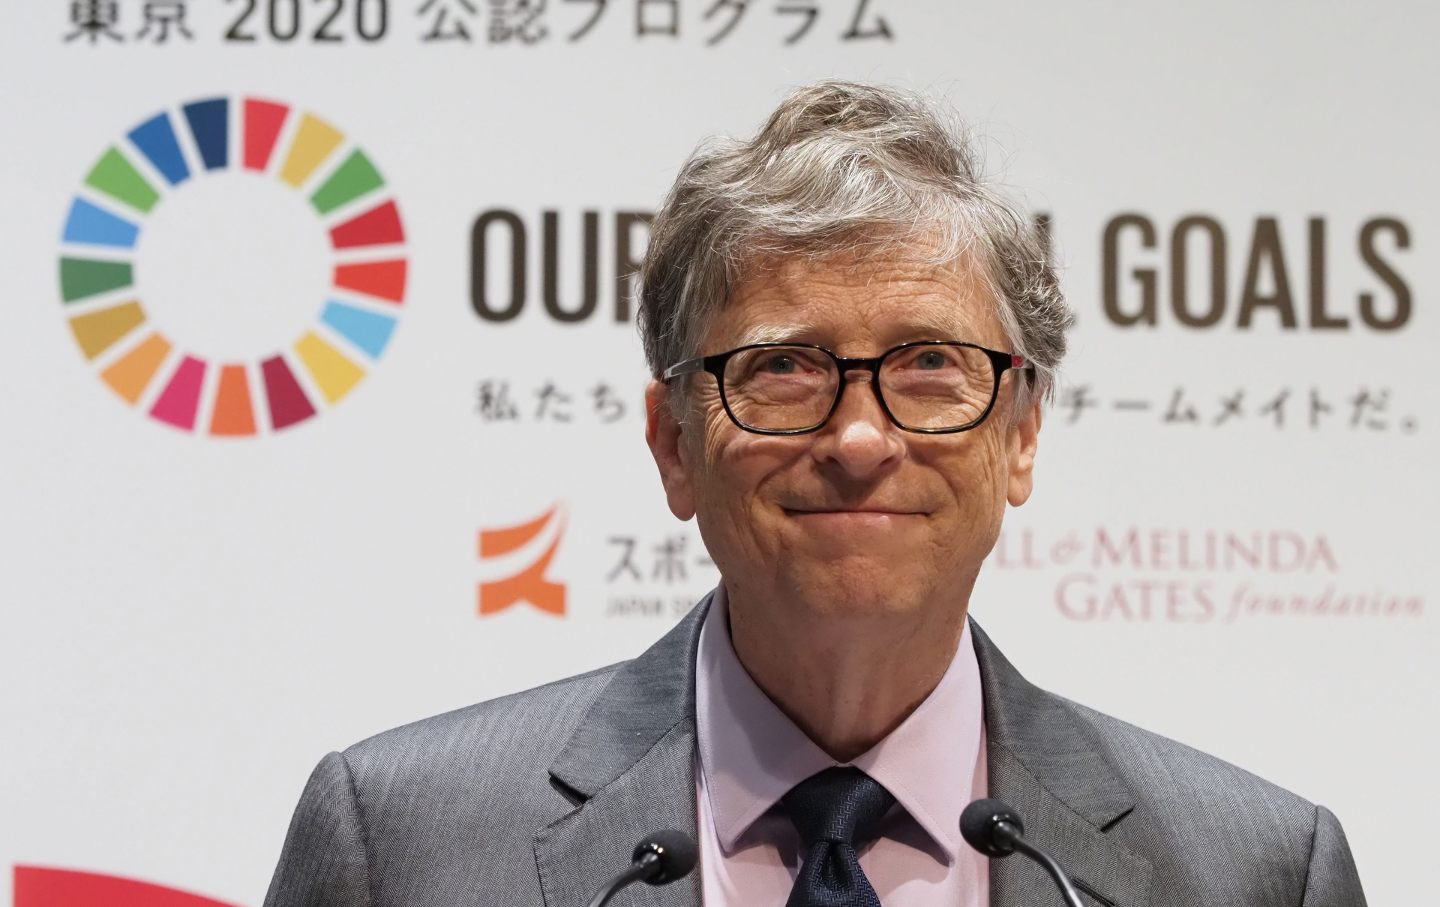 Bill Gates speaks during a press conference announcing a a plan to increase awareness of the UN's Sustainable Development Goals.